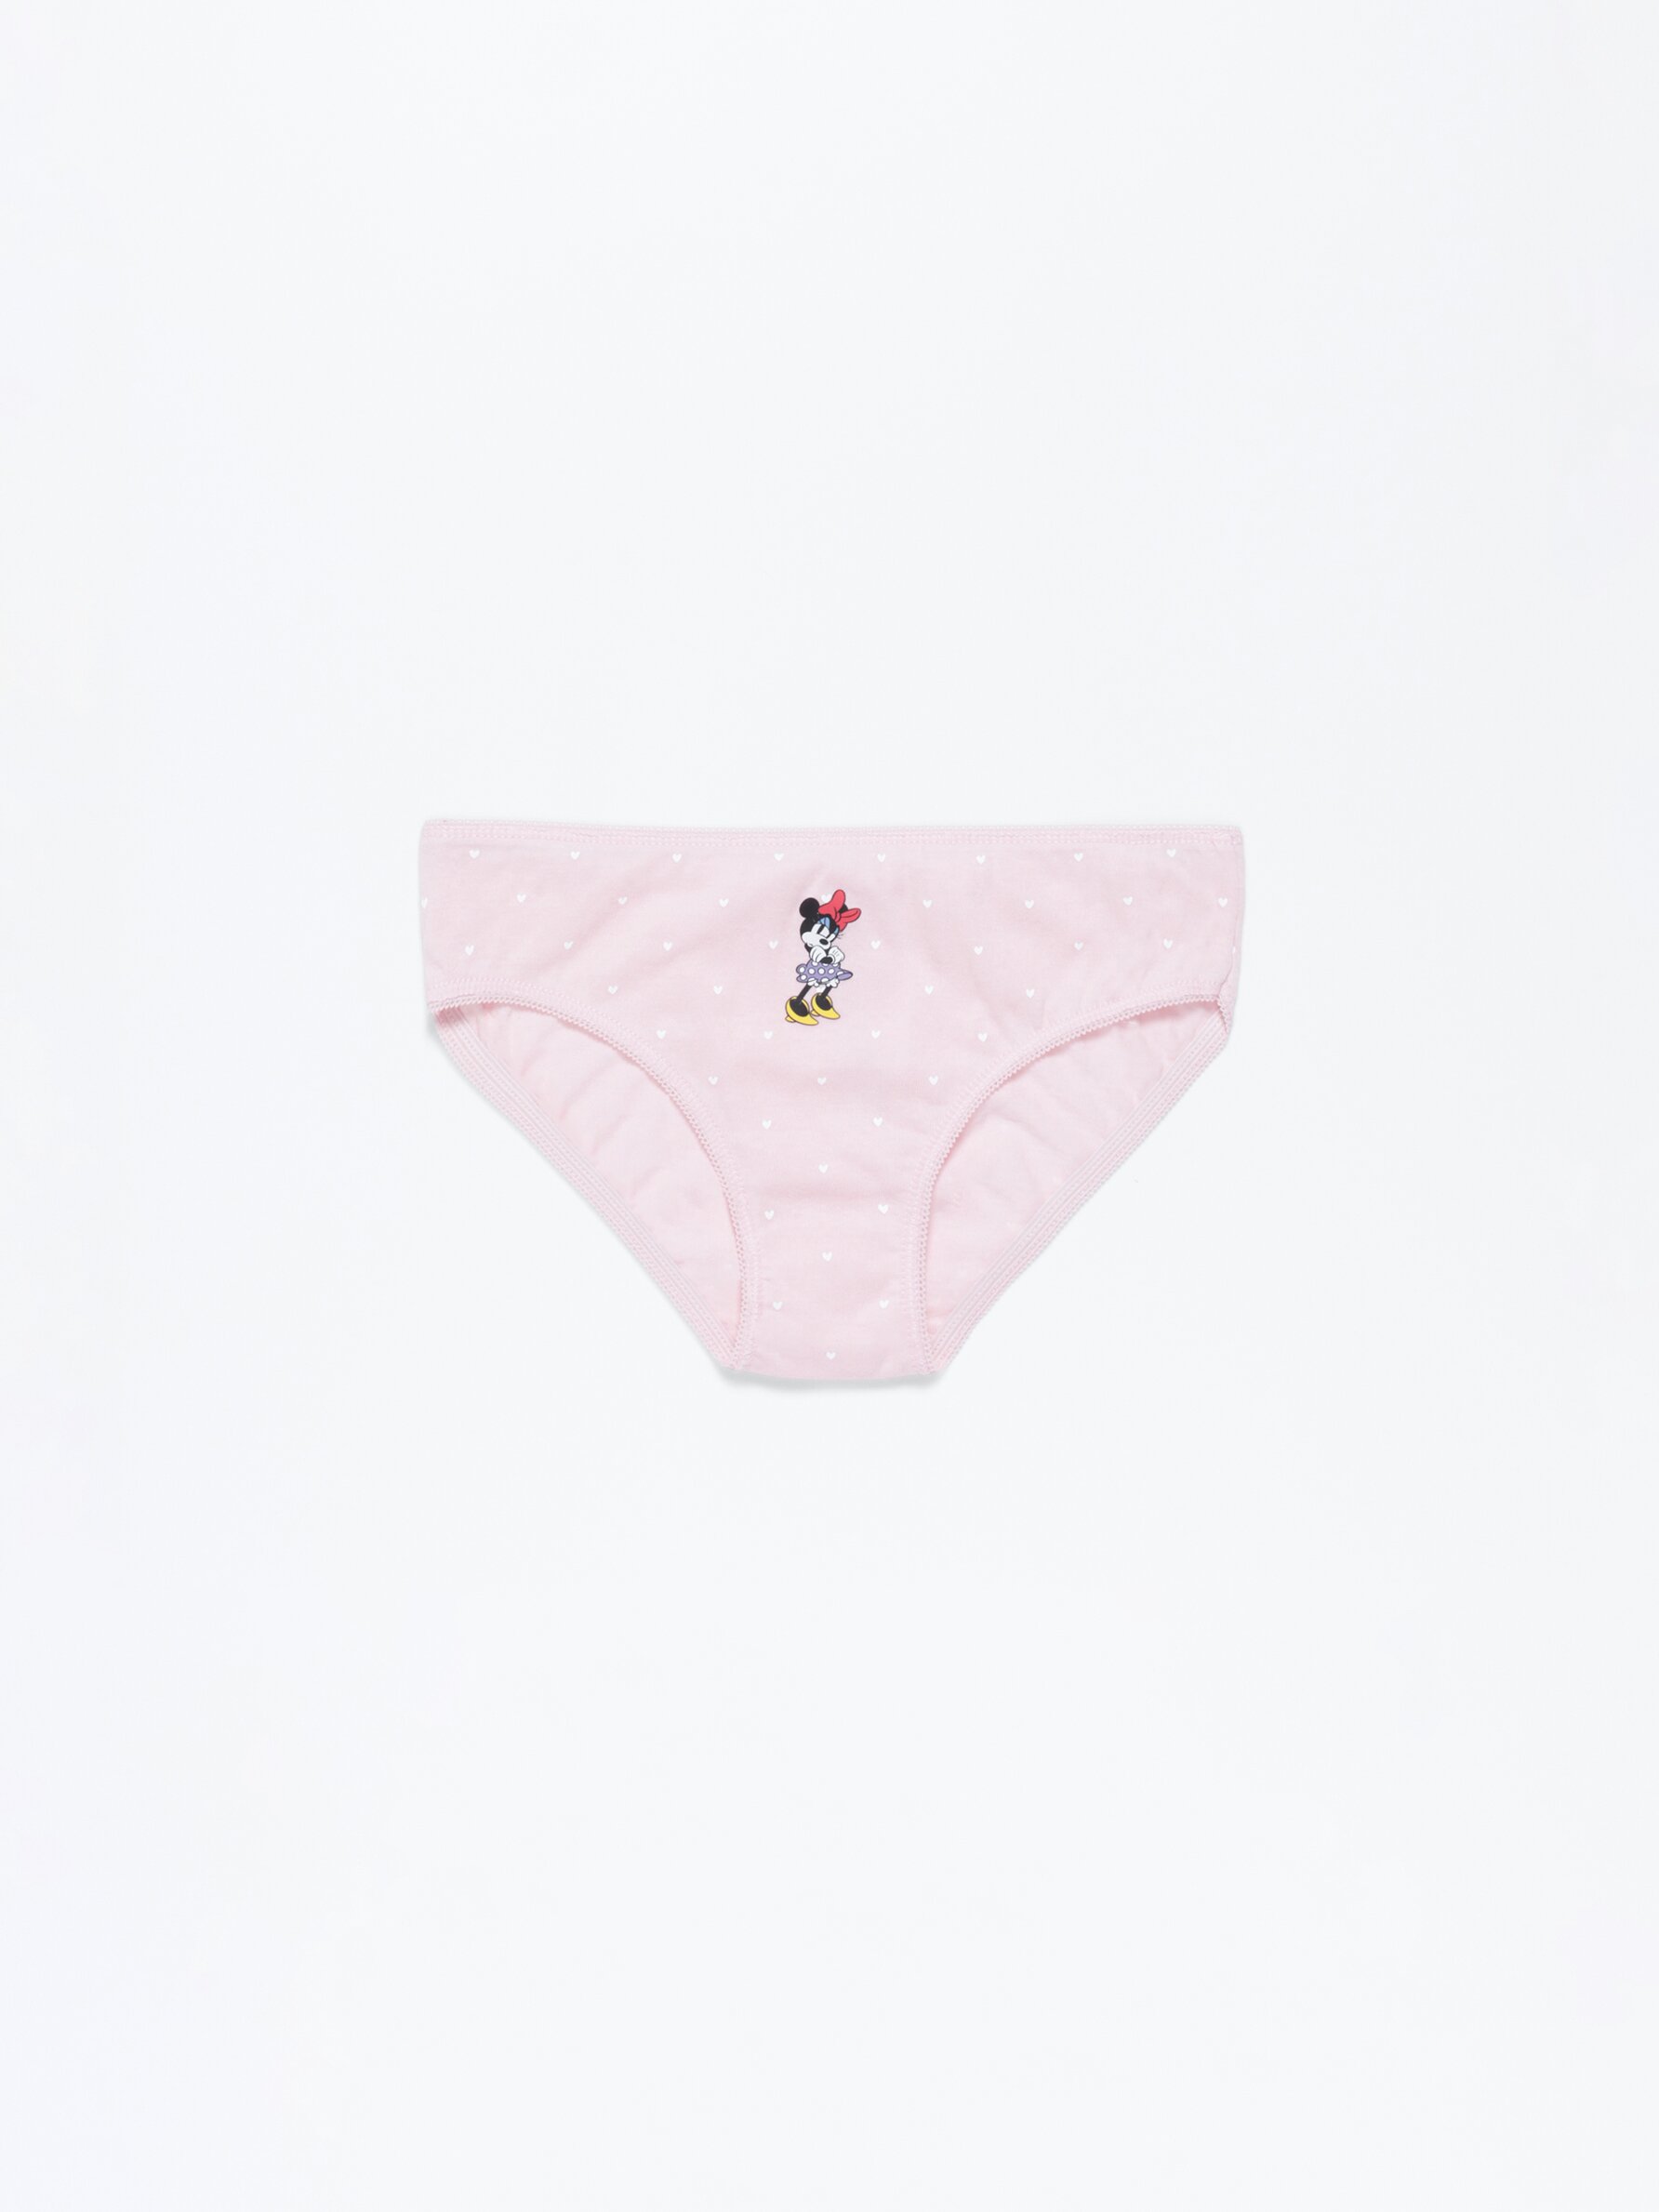 Disney Mickey and Minnie Mouse Print Pink Briefs 5 Pack